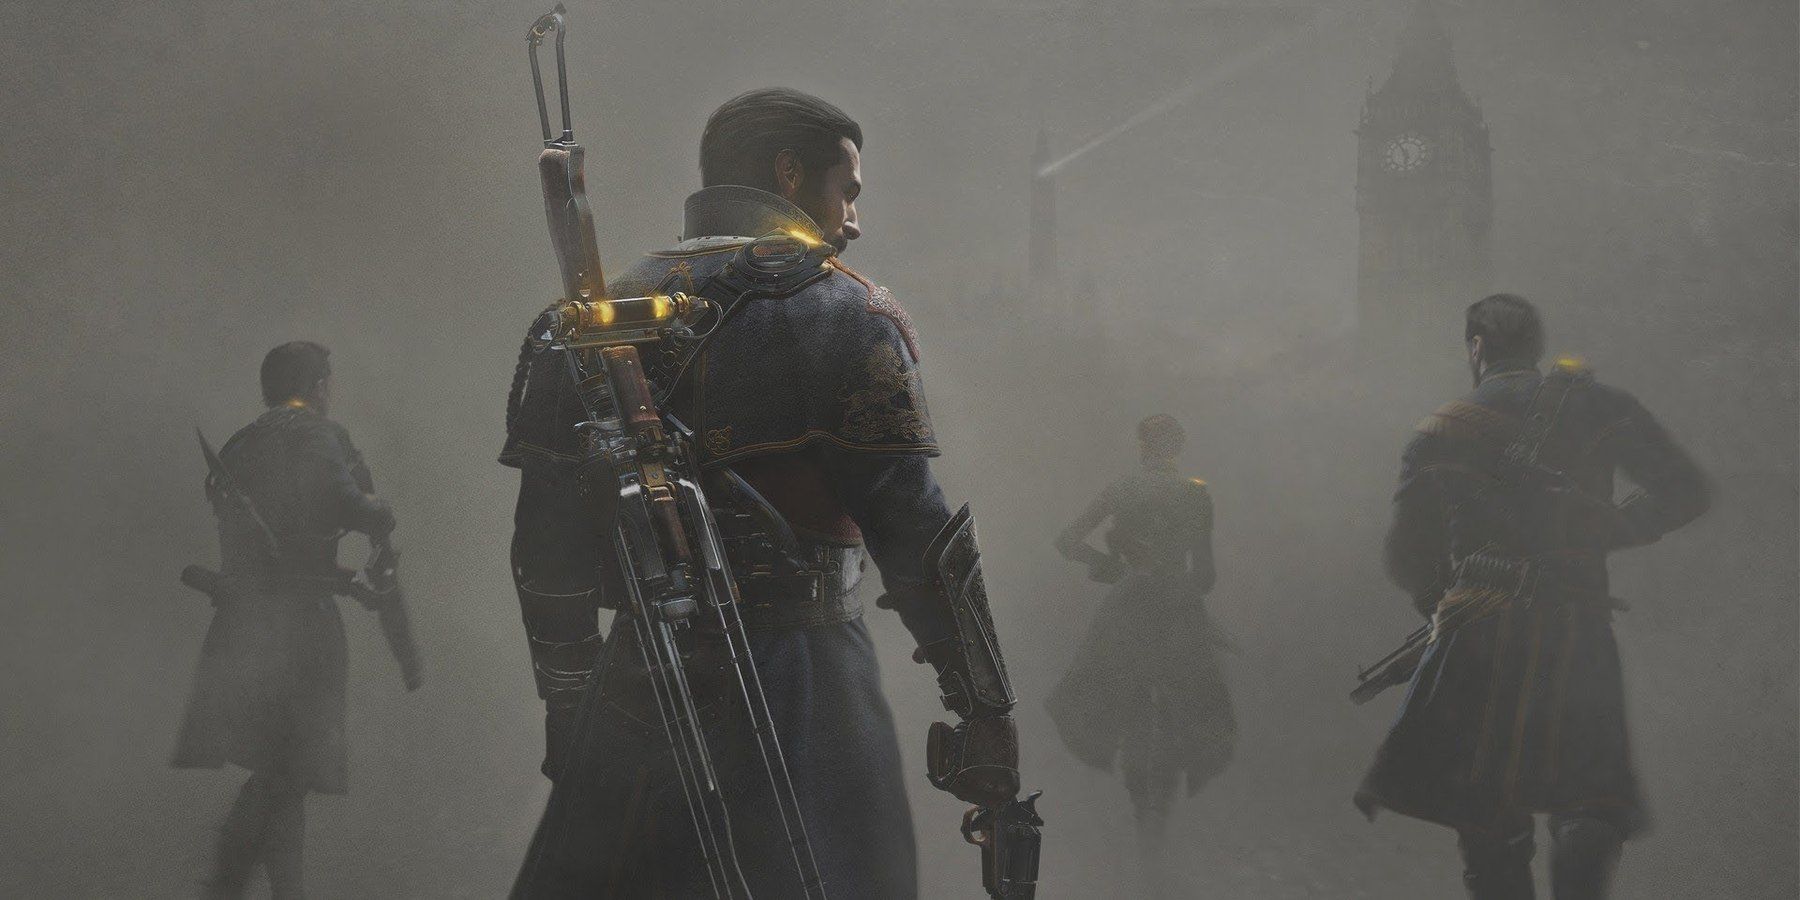 Sir Galahad and three other Knights of the Round walk through a foggy London, weapons drawn in The Order: 1886